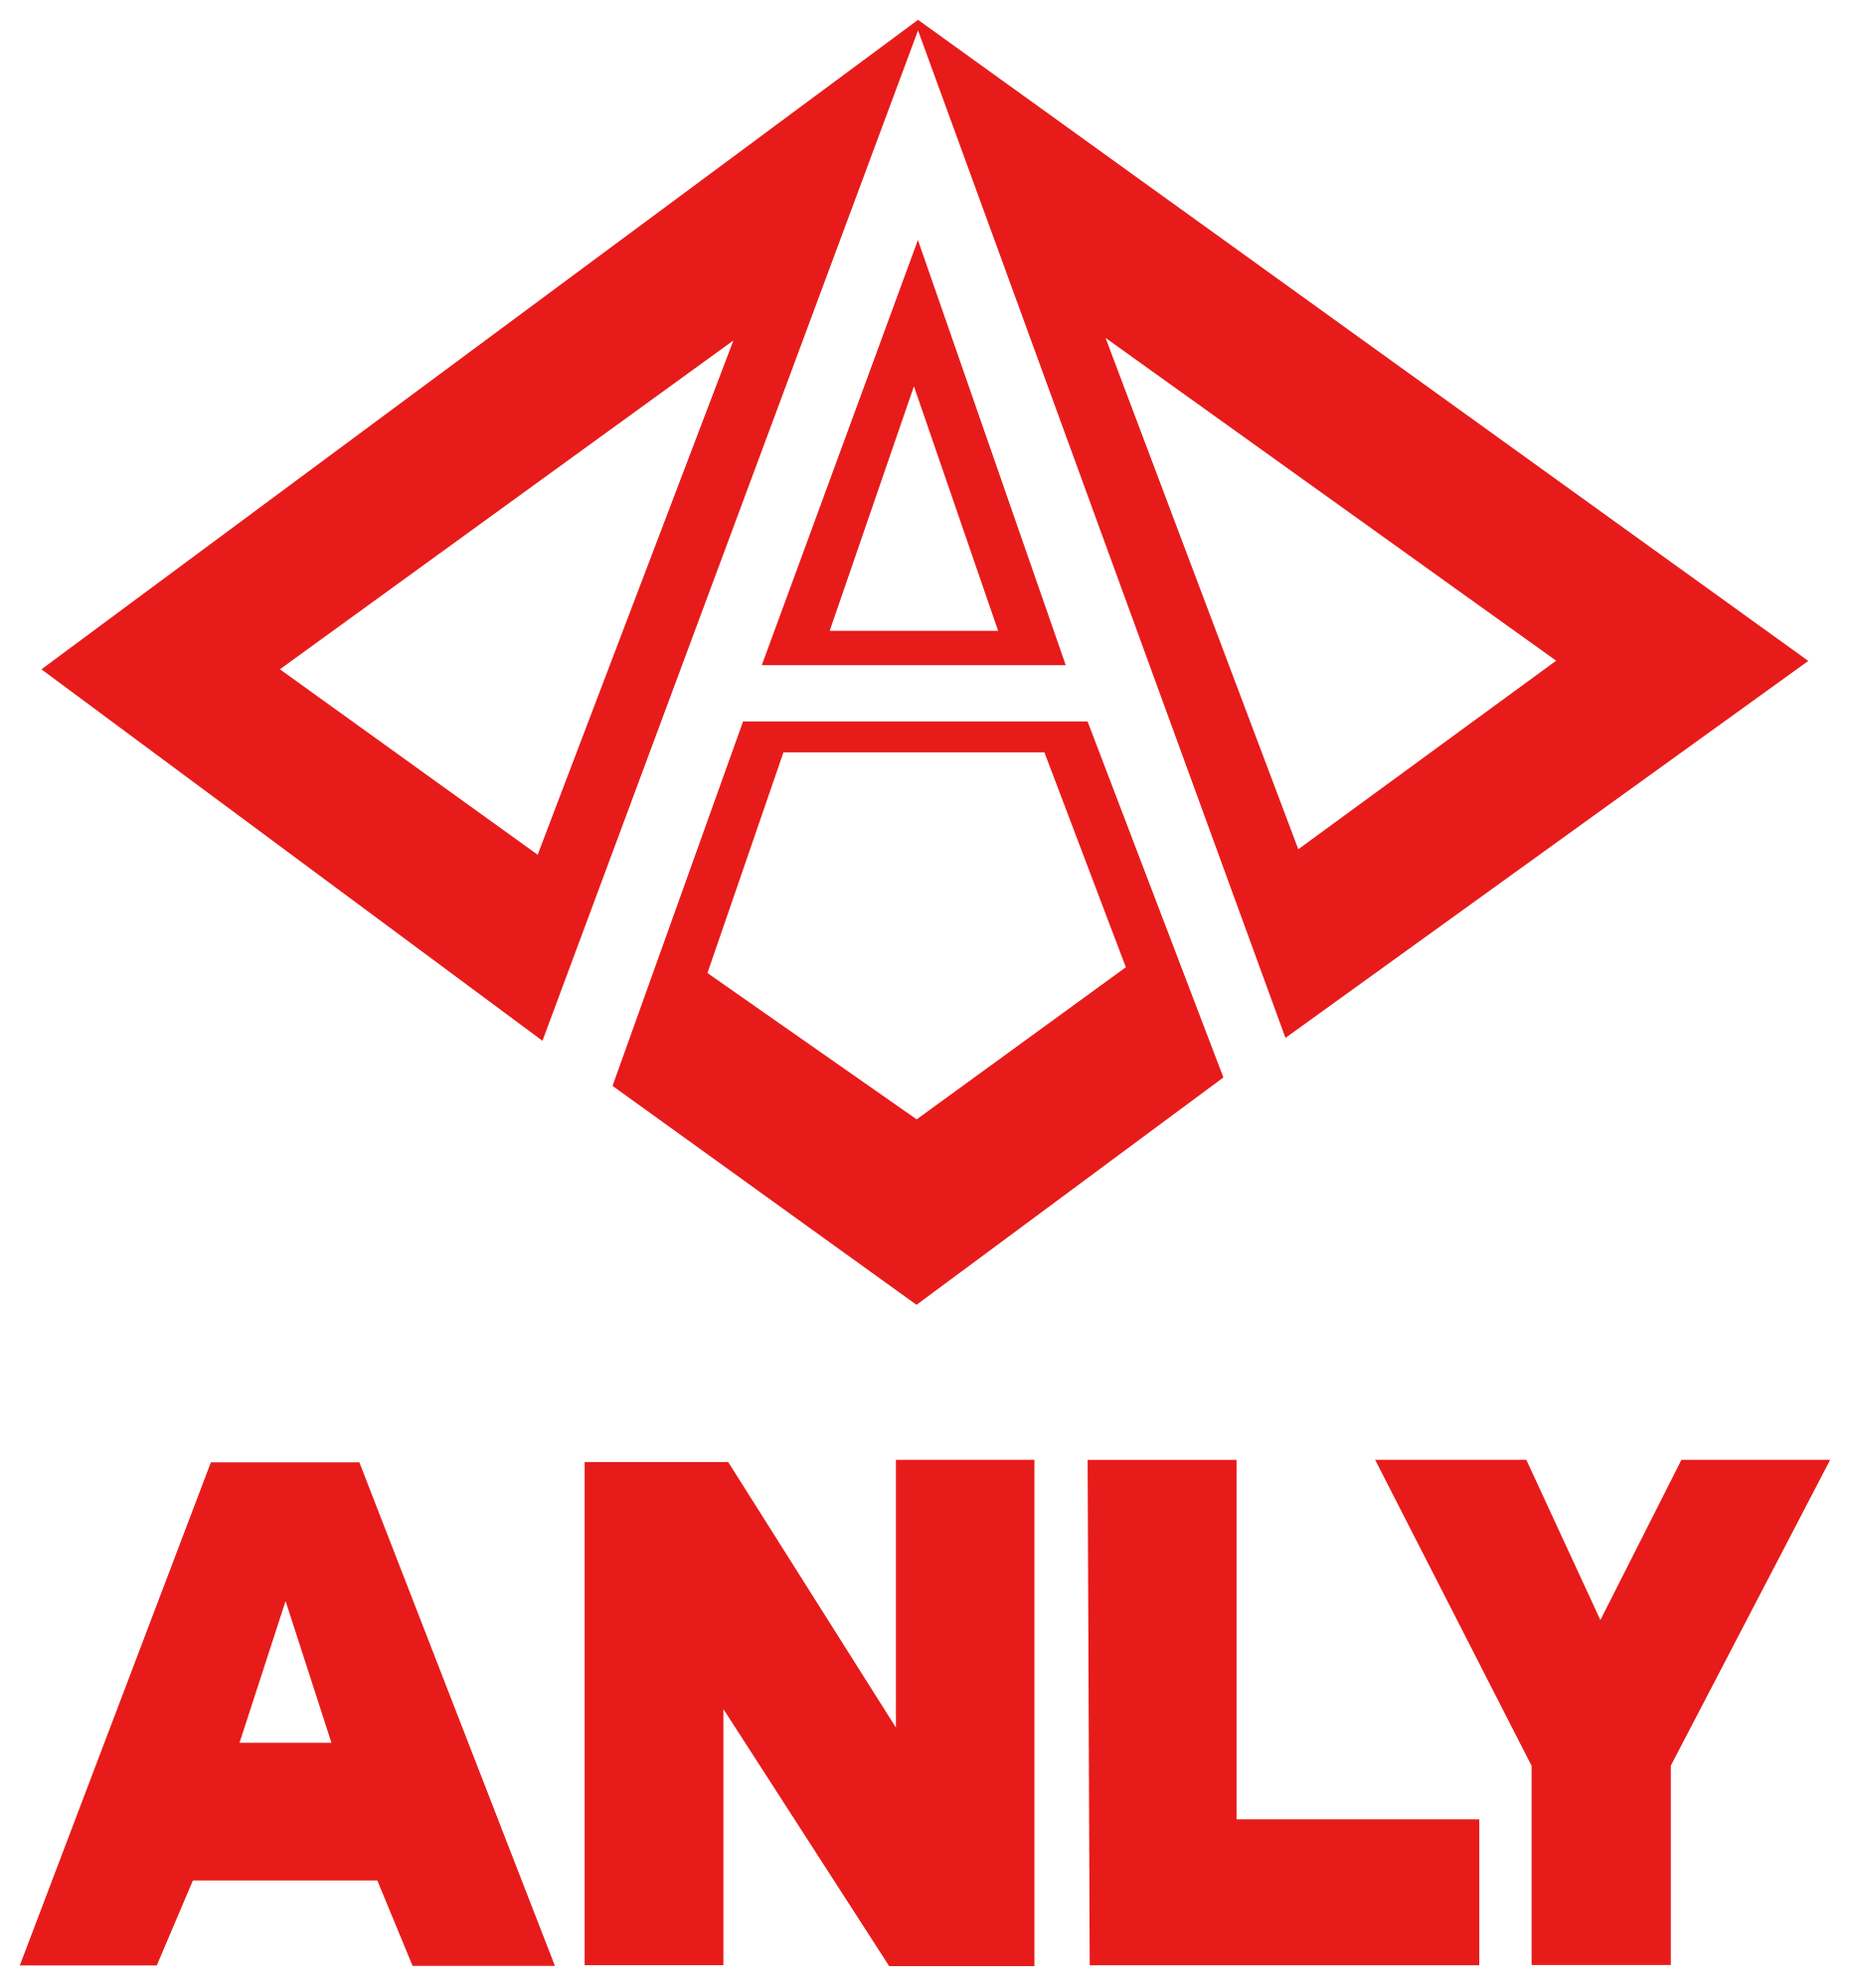 ANLY ELECTRONICS